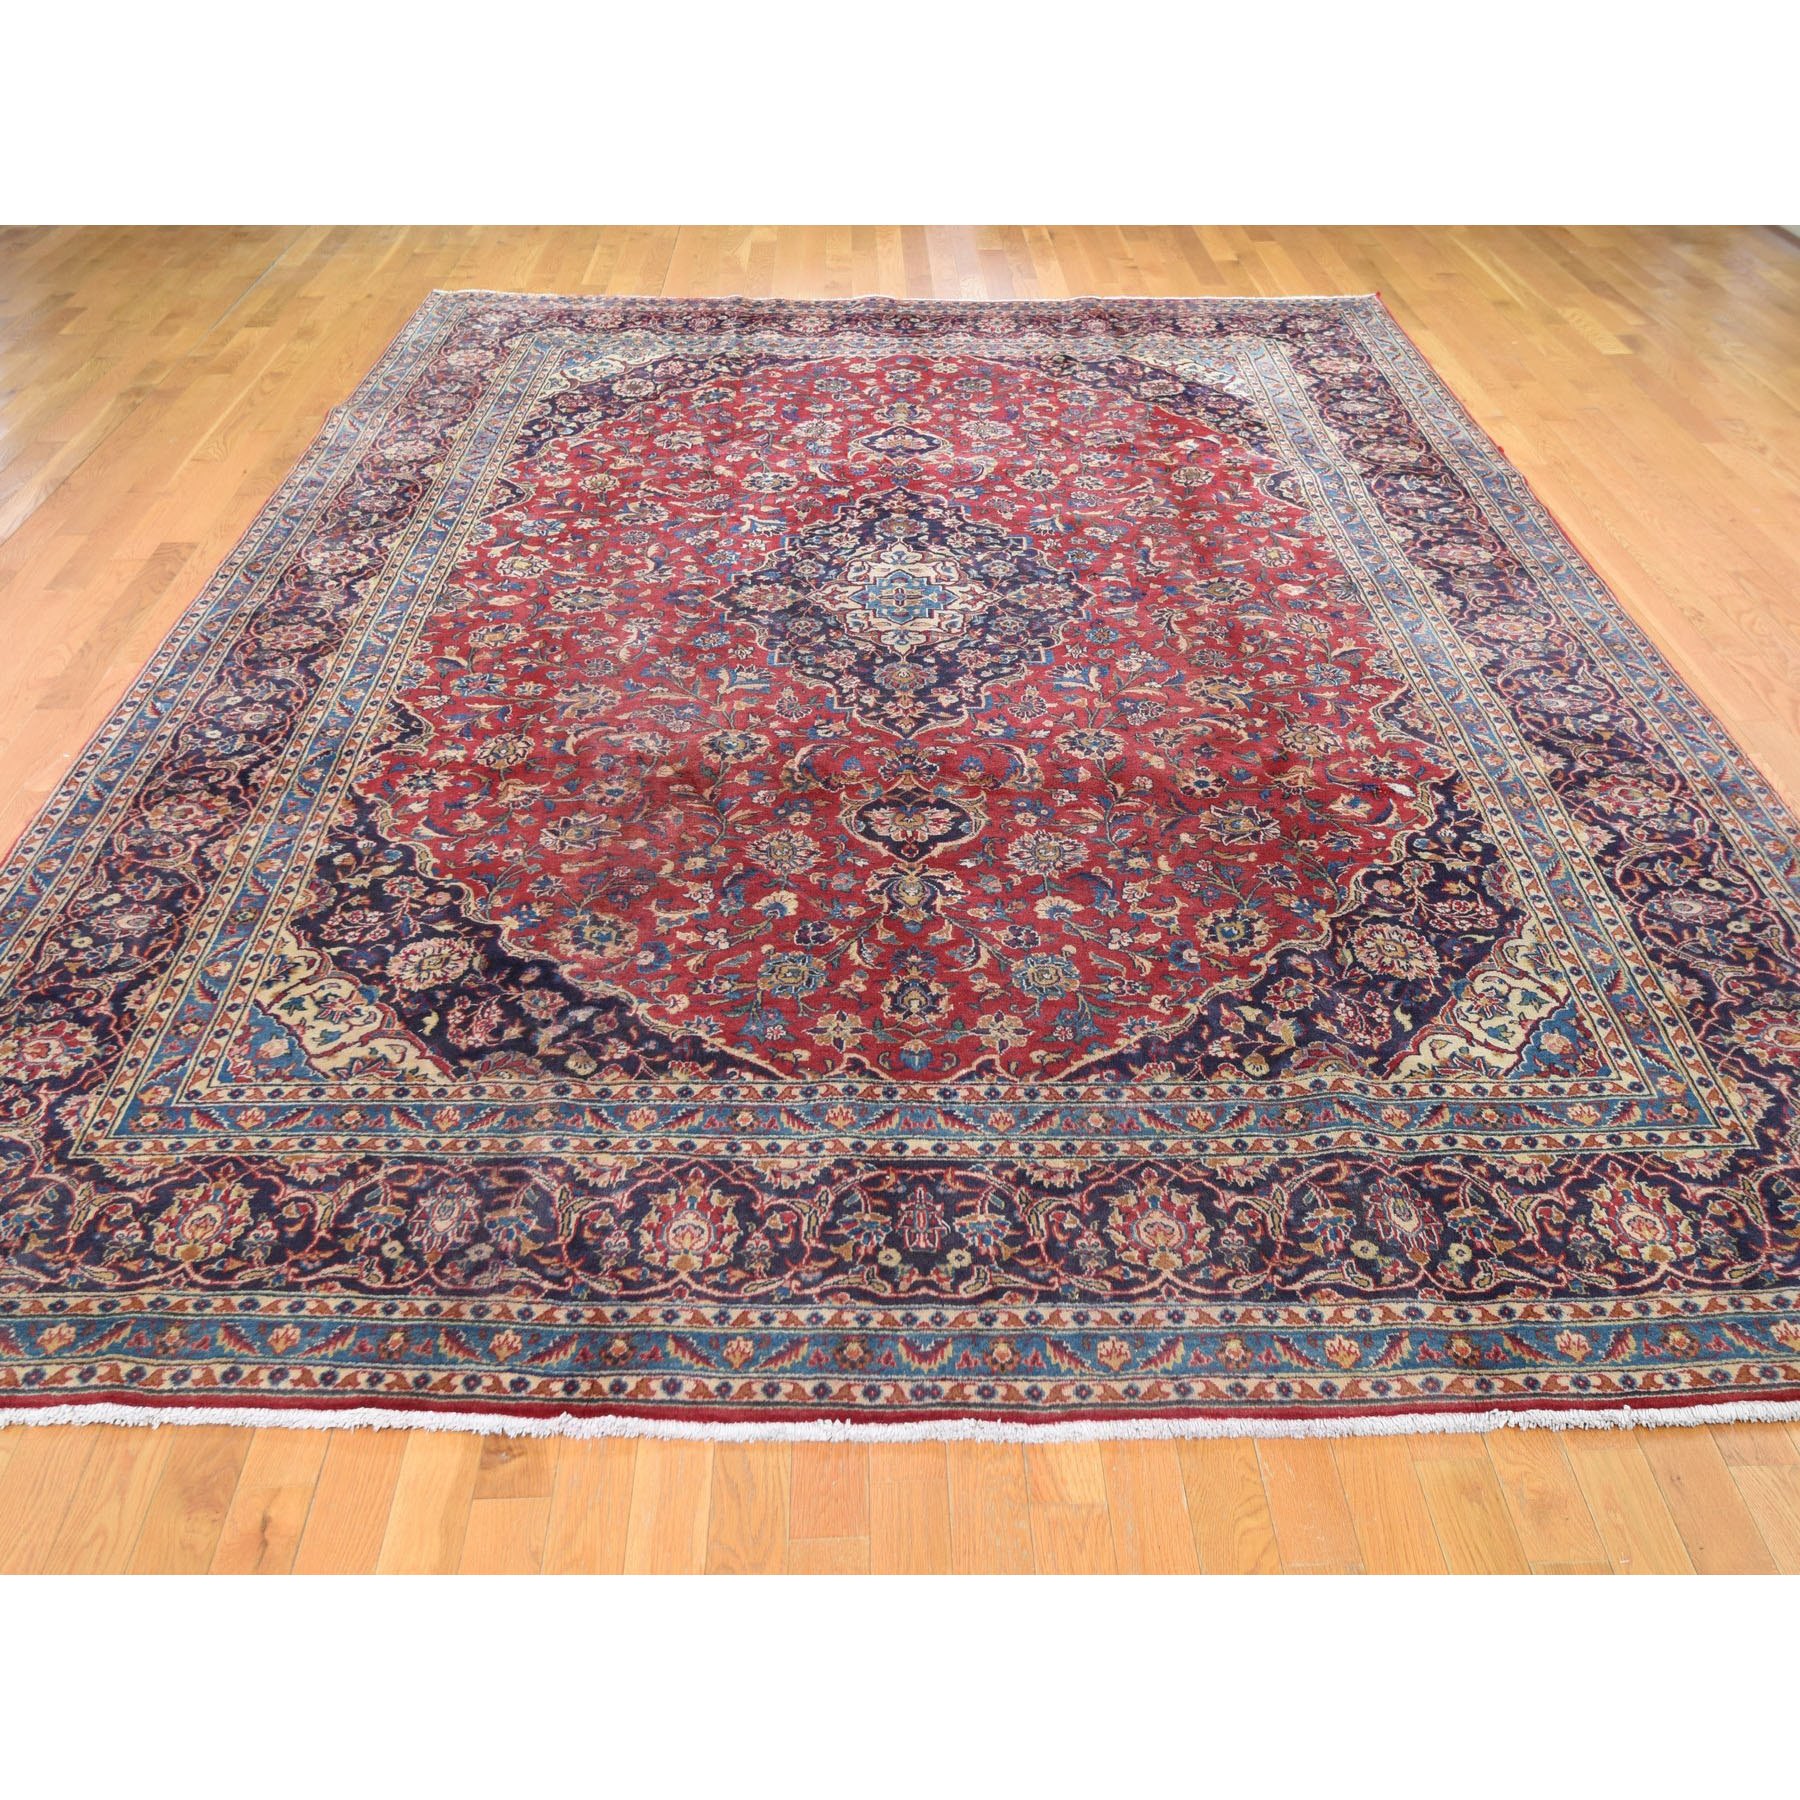 9-6 x13-2  Red Semi Antique Persian Kashan Full Pile Pure Wool Hand Knotted Oriental Rug 